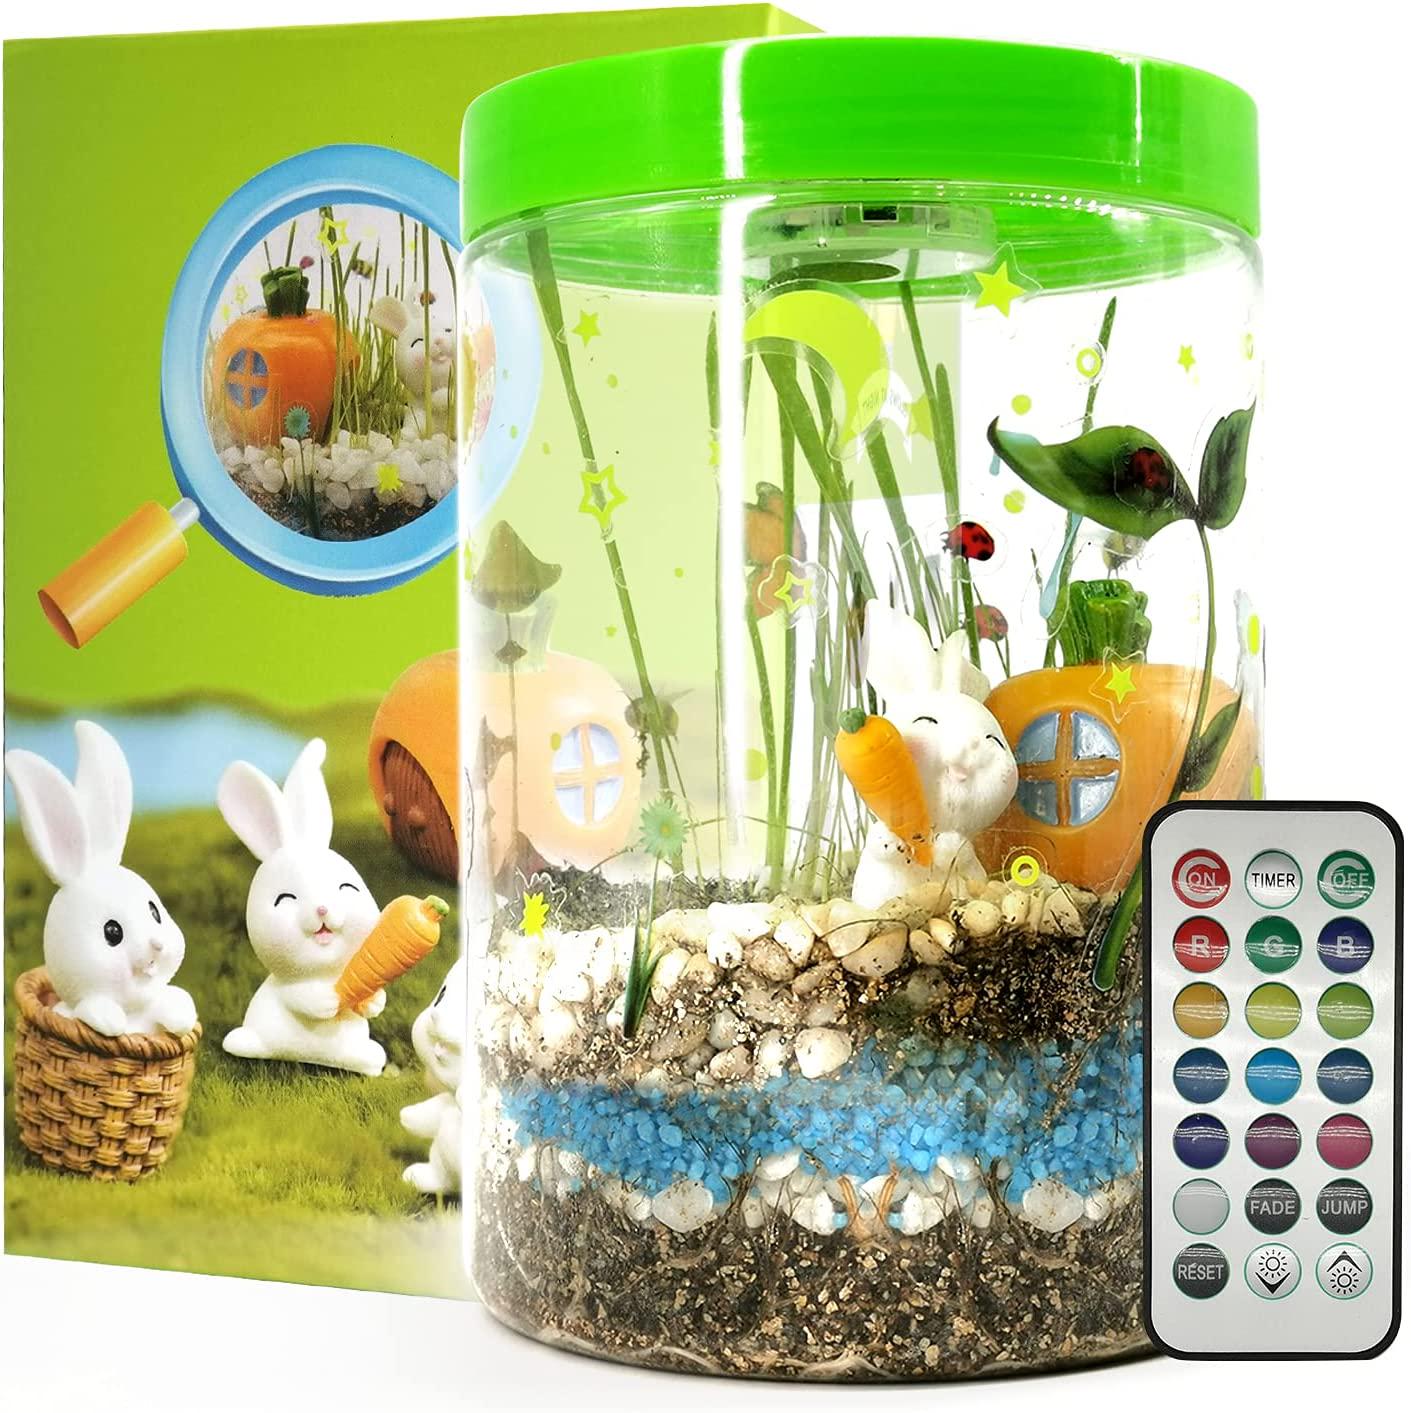 TYZEST, Light-up Terrarium Kit for Kids with 3 Colorful LED on Lid- Kids Birthday STEM Educational DIY Science Project Gifts- Create Your Own Customized Mini Garden in a Jar That Glows at Night-Children Toys